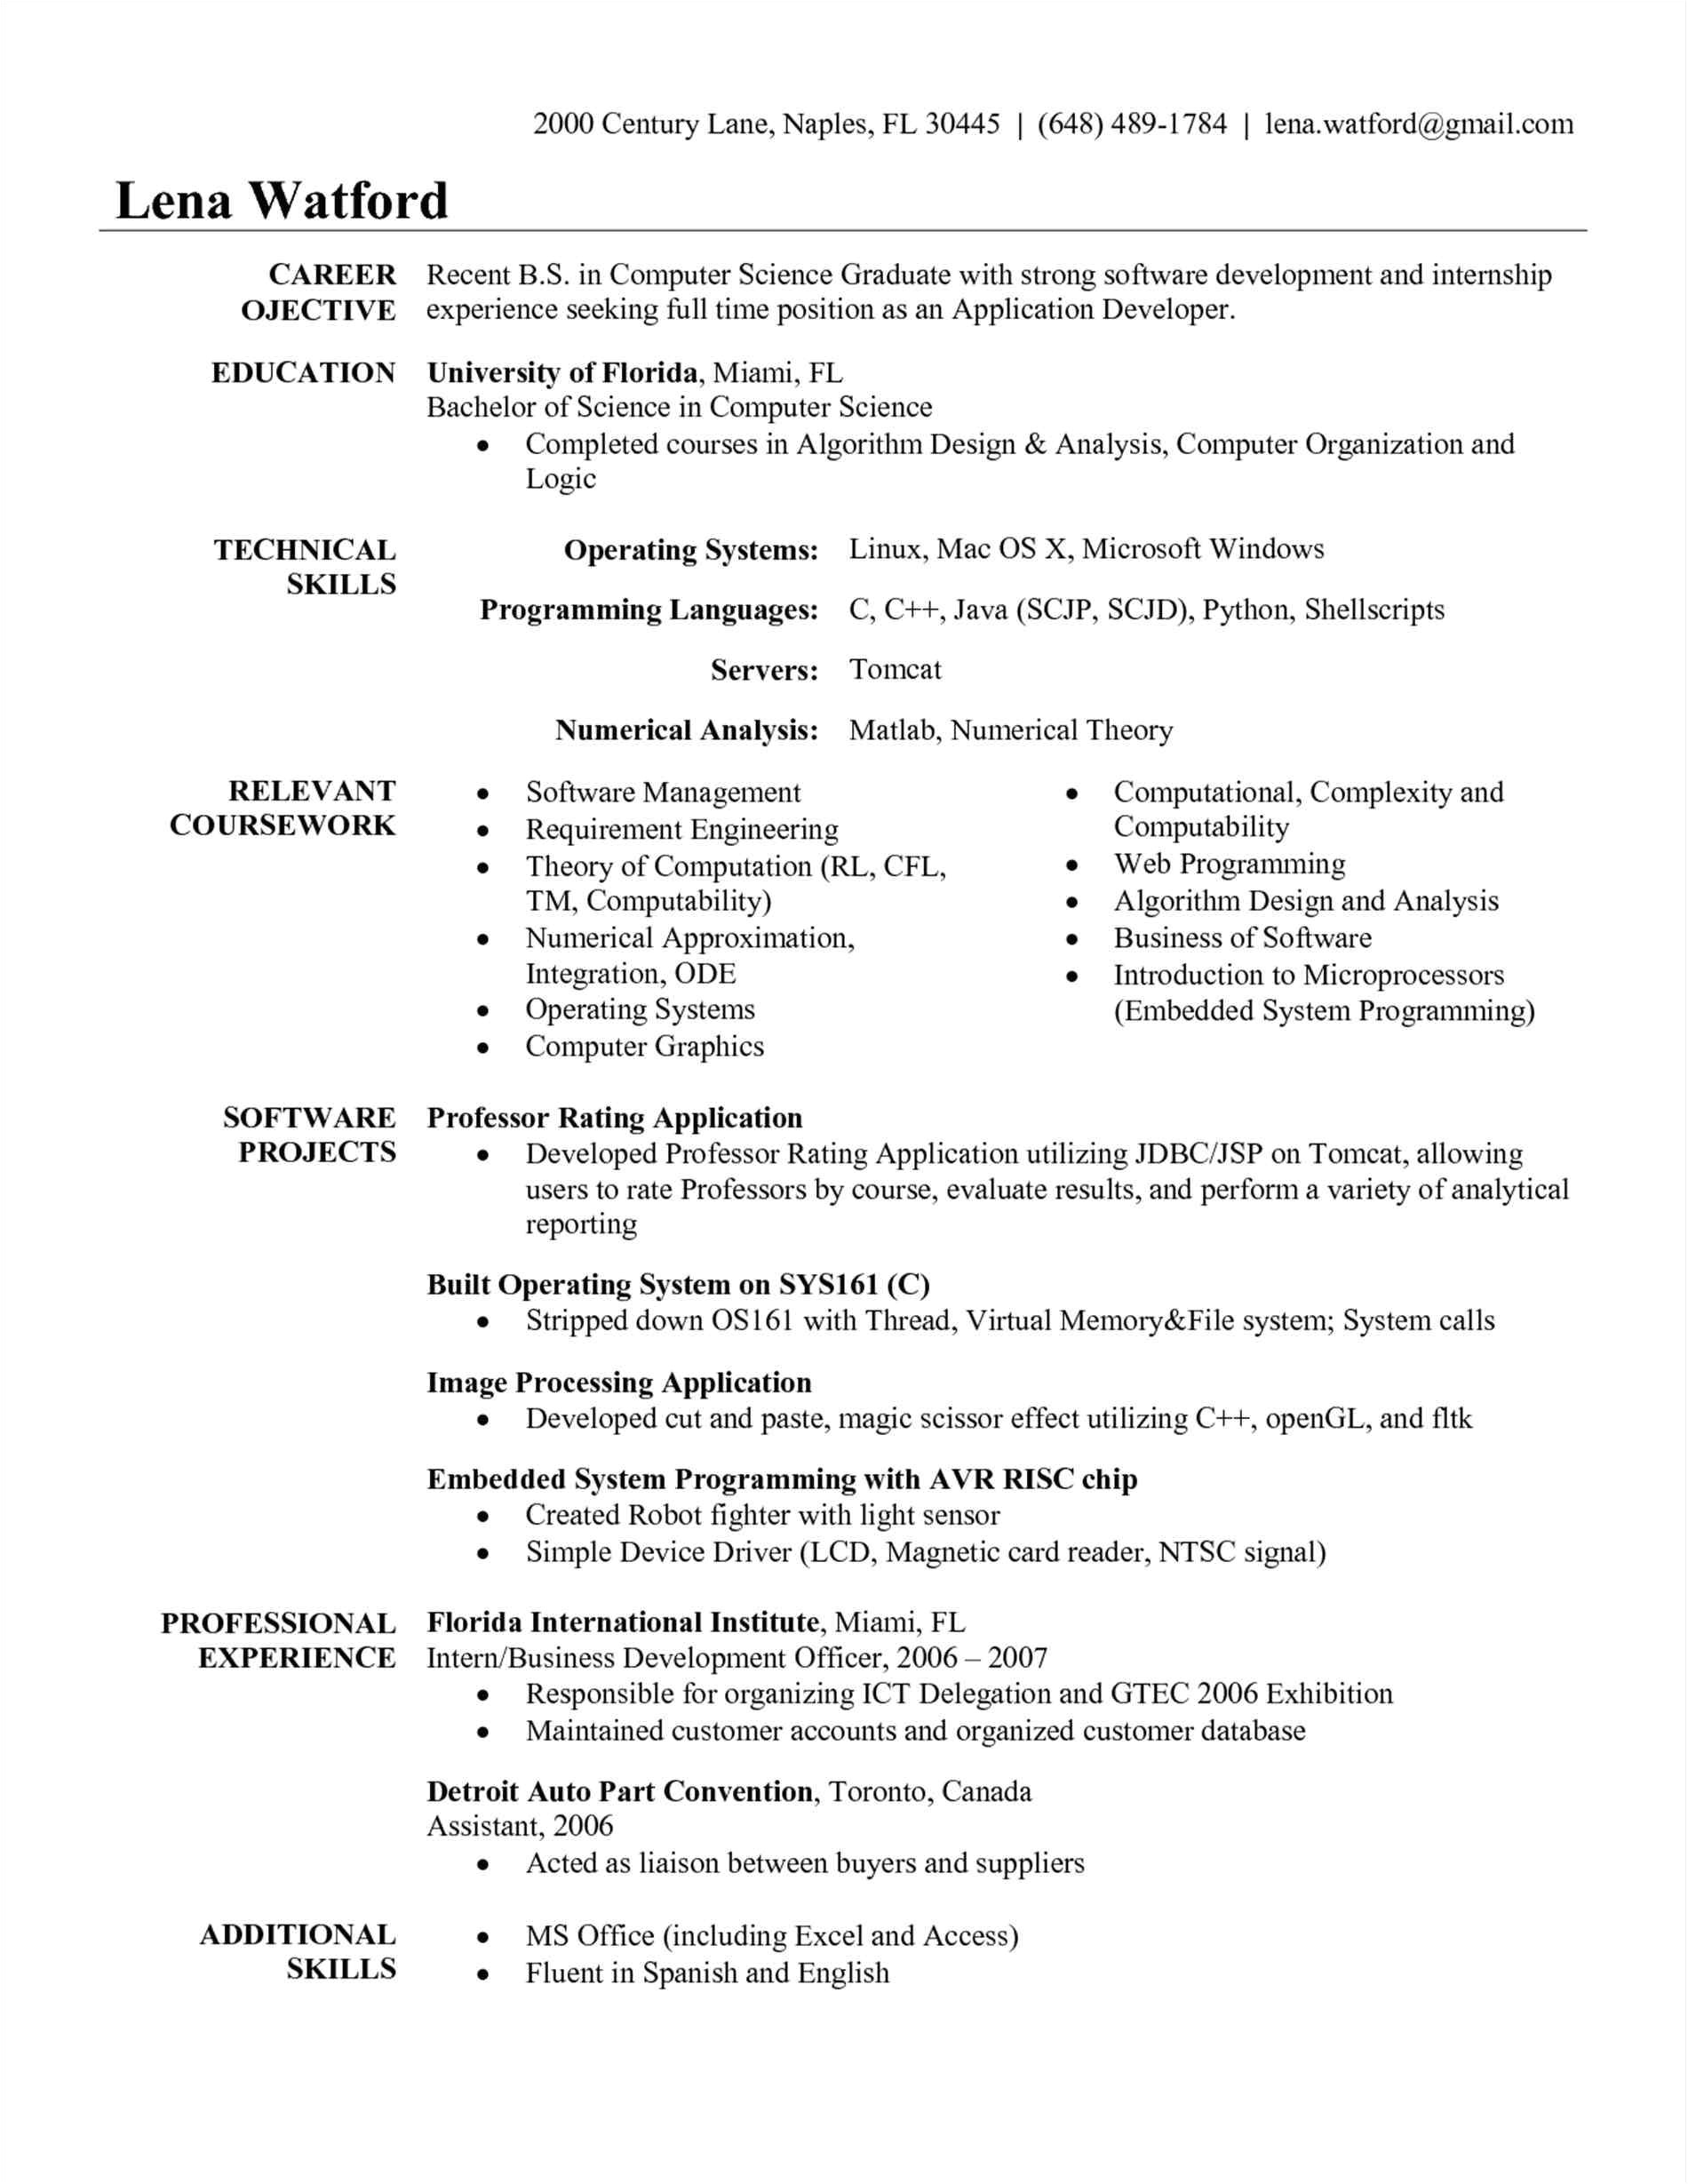 sample resume for software engineer with 2 years experience